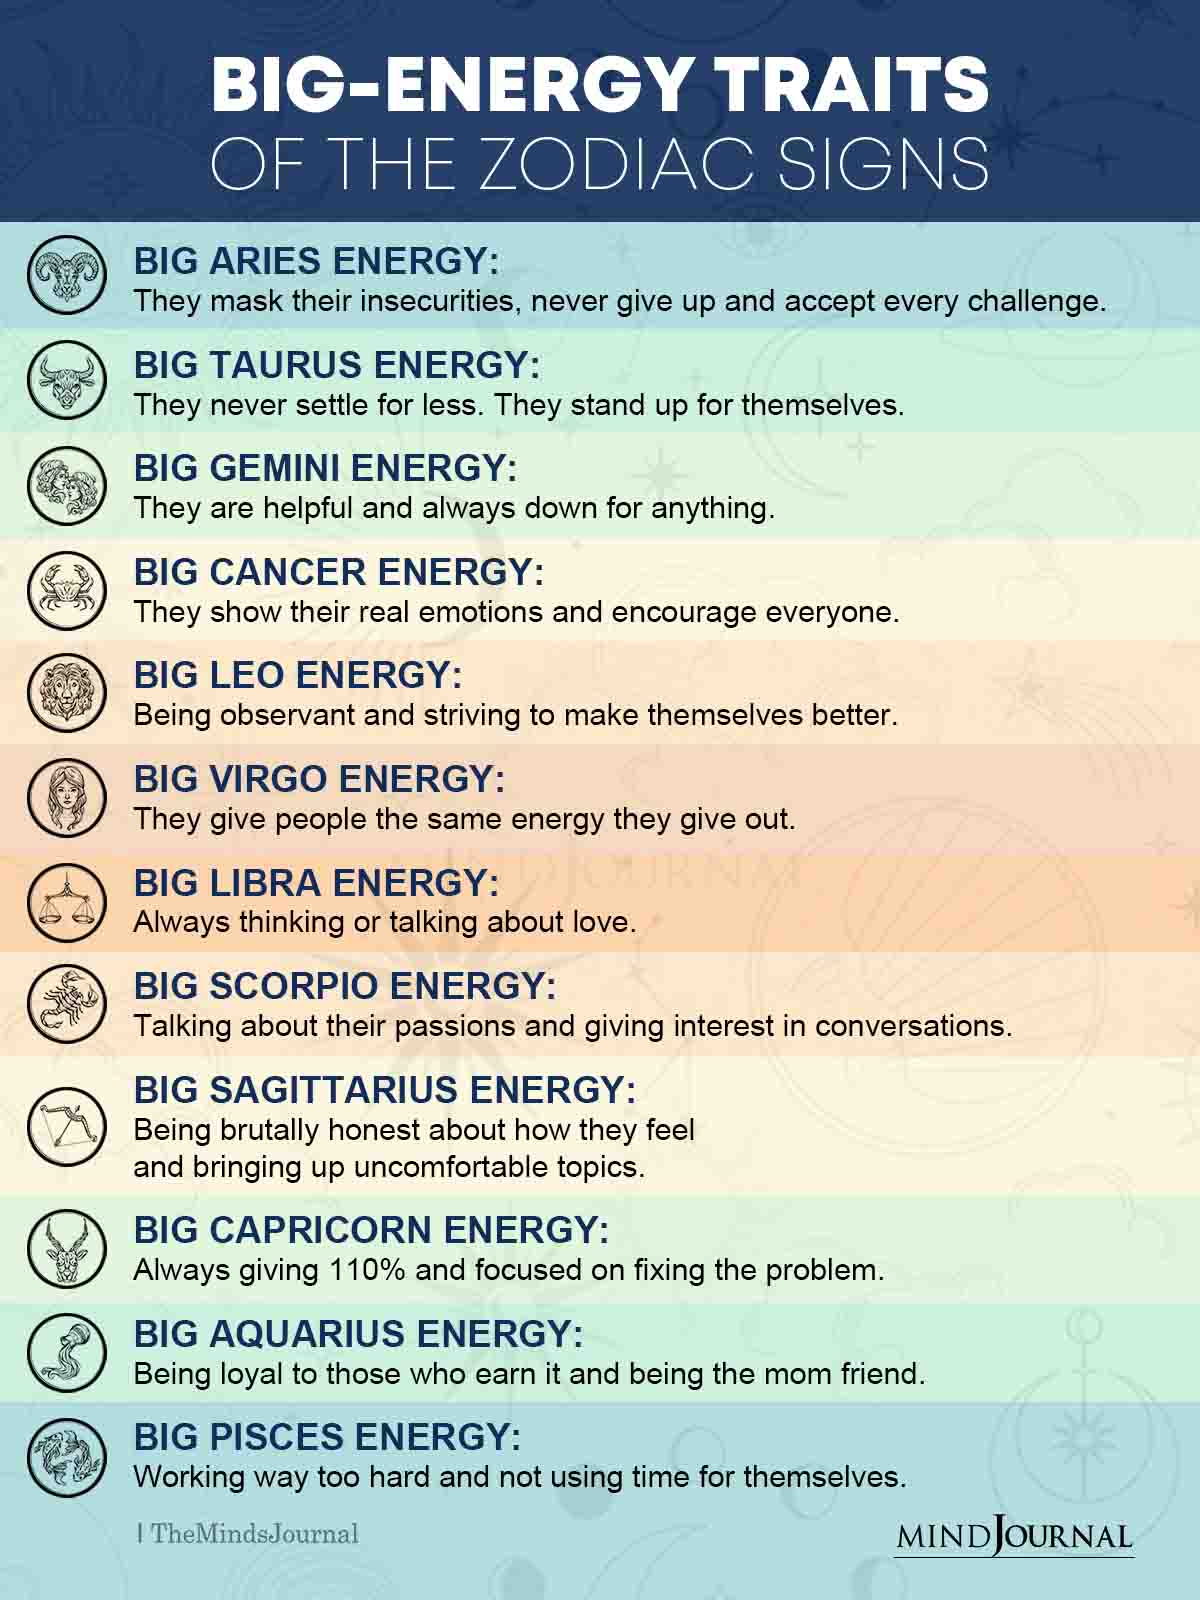 Big Energy Traits of The Zodiac Signs